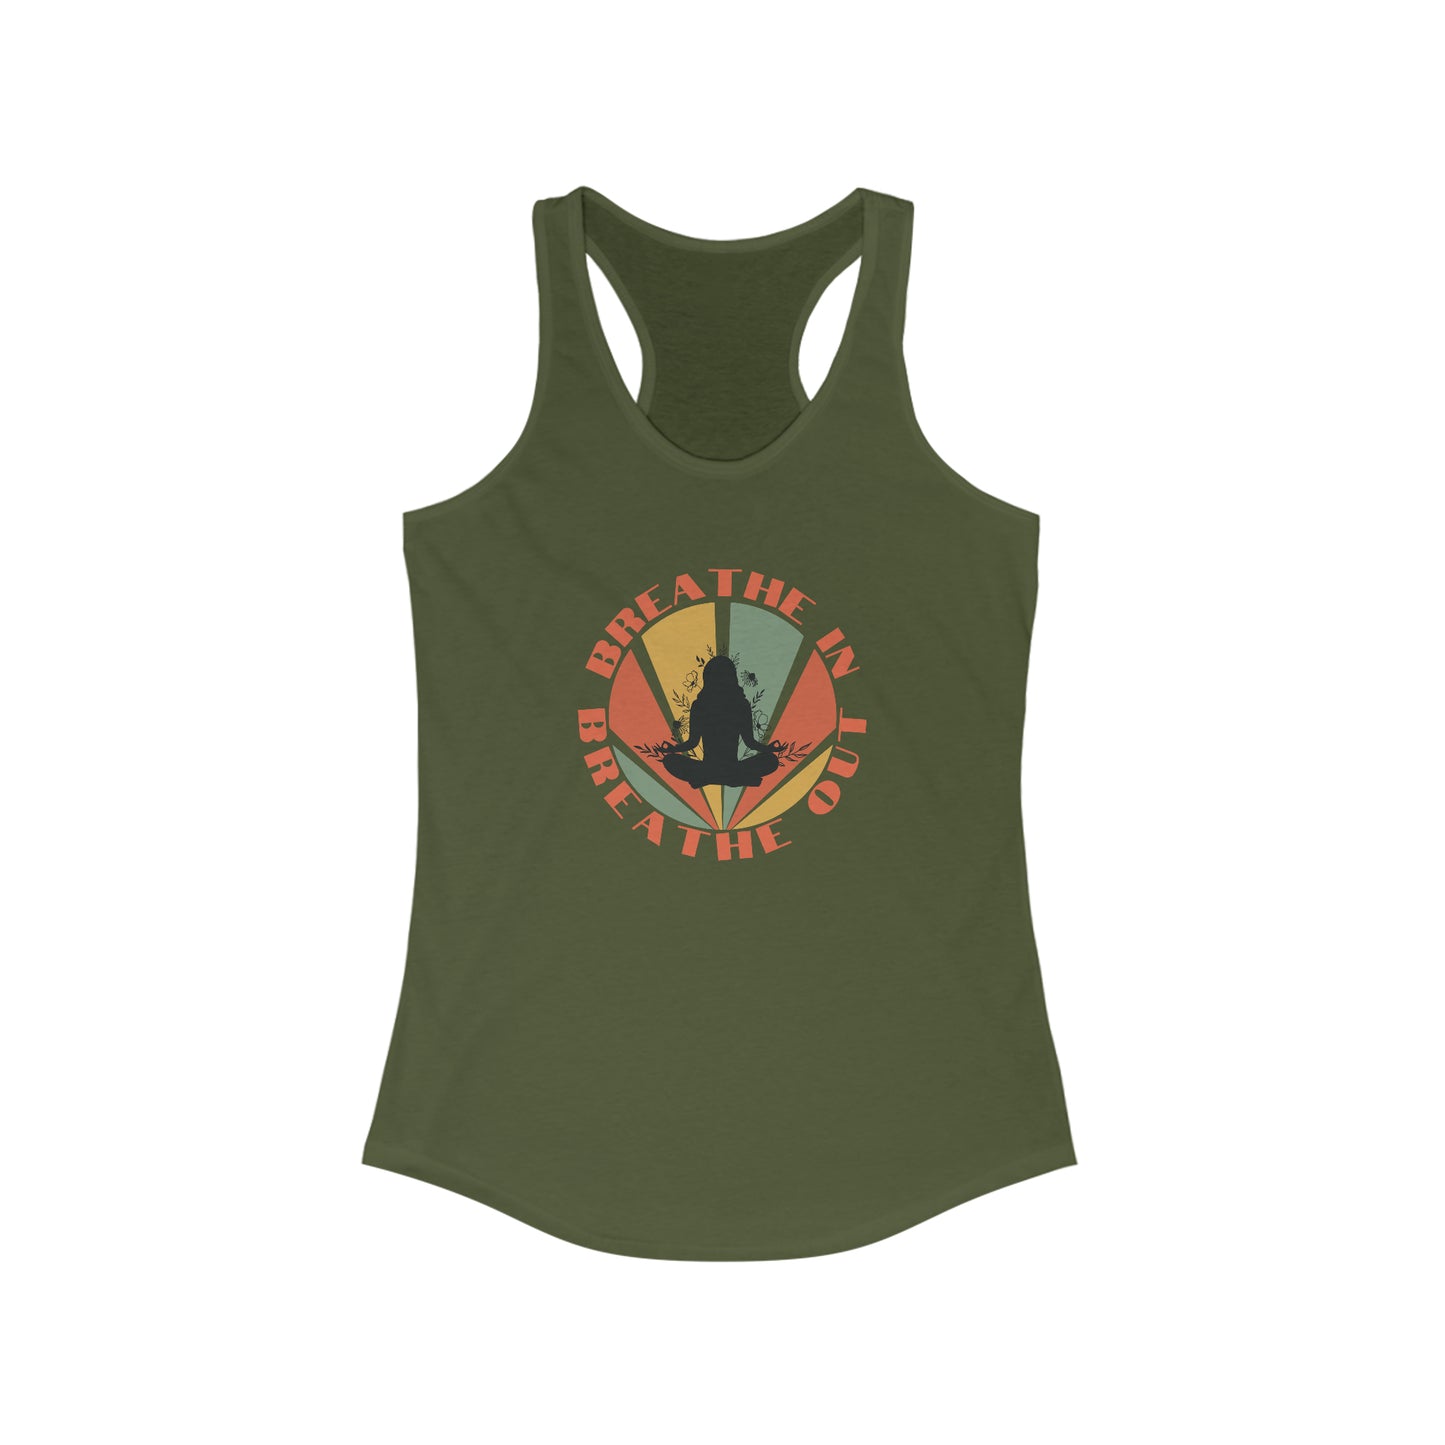 Breathe In Breathe Out  - Yoga Inspired Tank Top